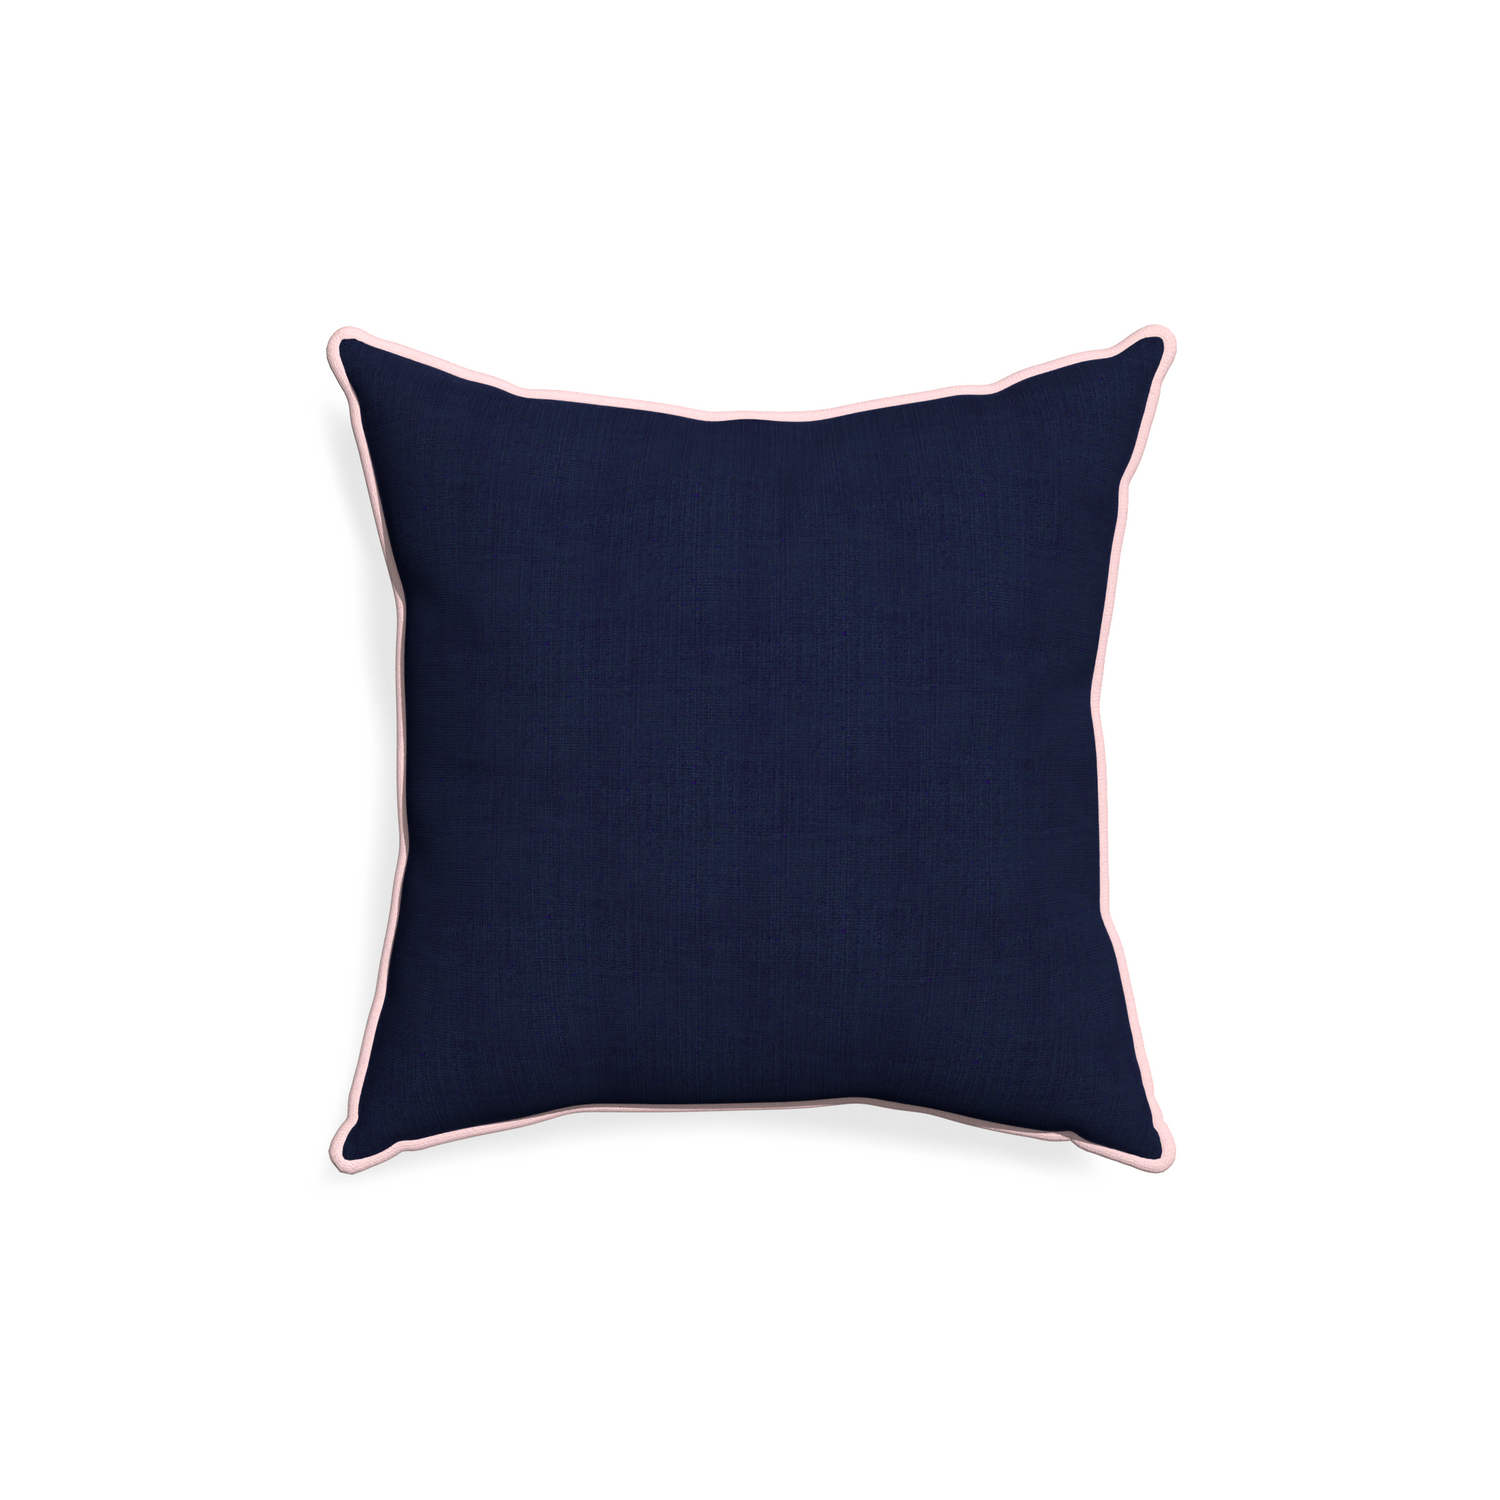 18-square midnight custom pillow with petal piping on white background